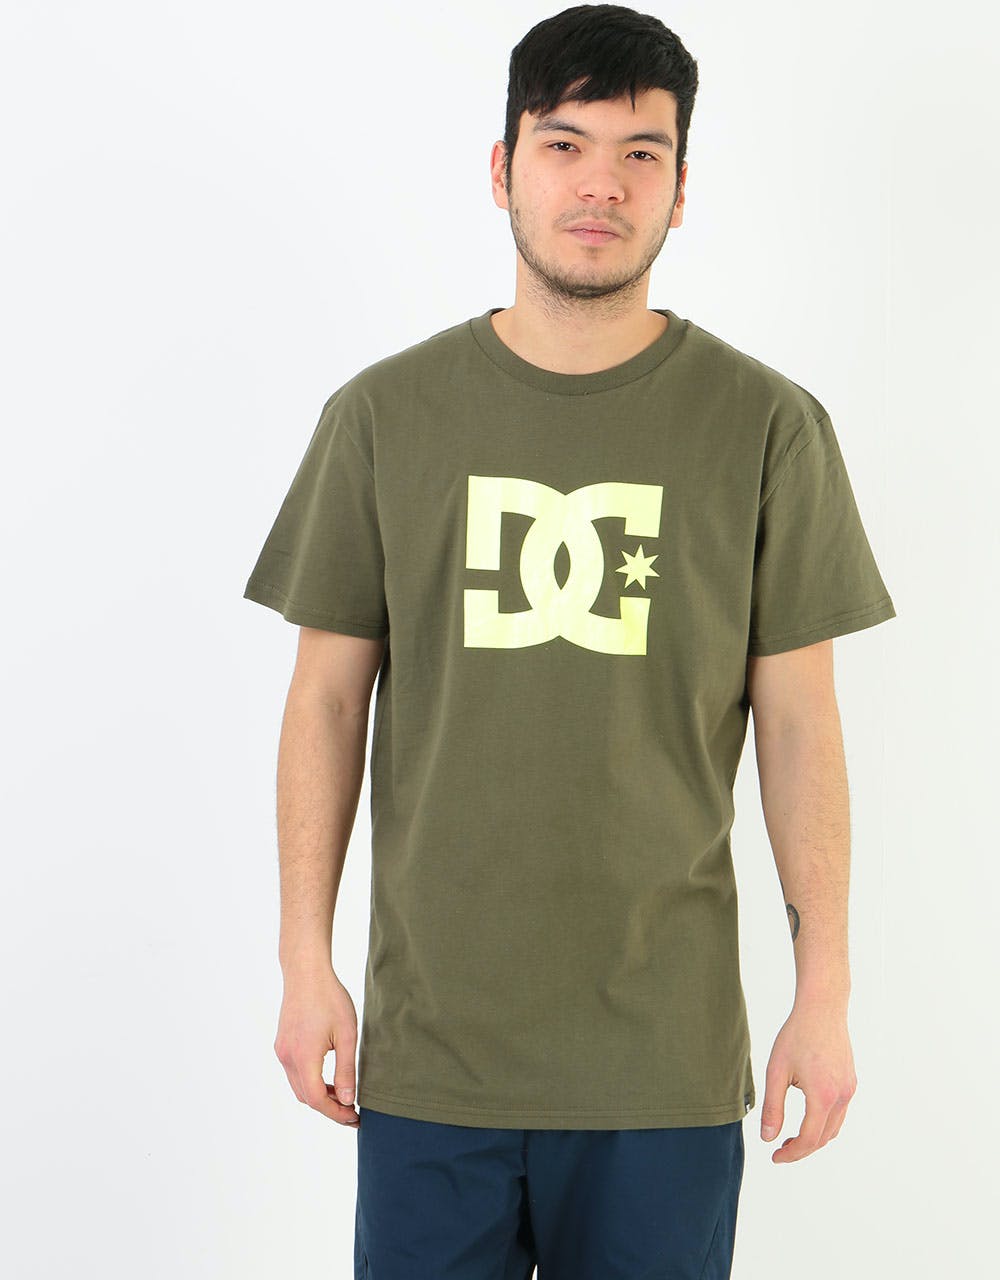 DC Star 2 T-Shirt - Fatigue Green/Safety Yellow